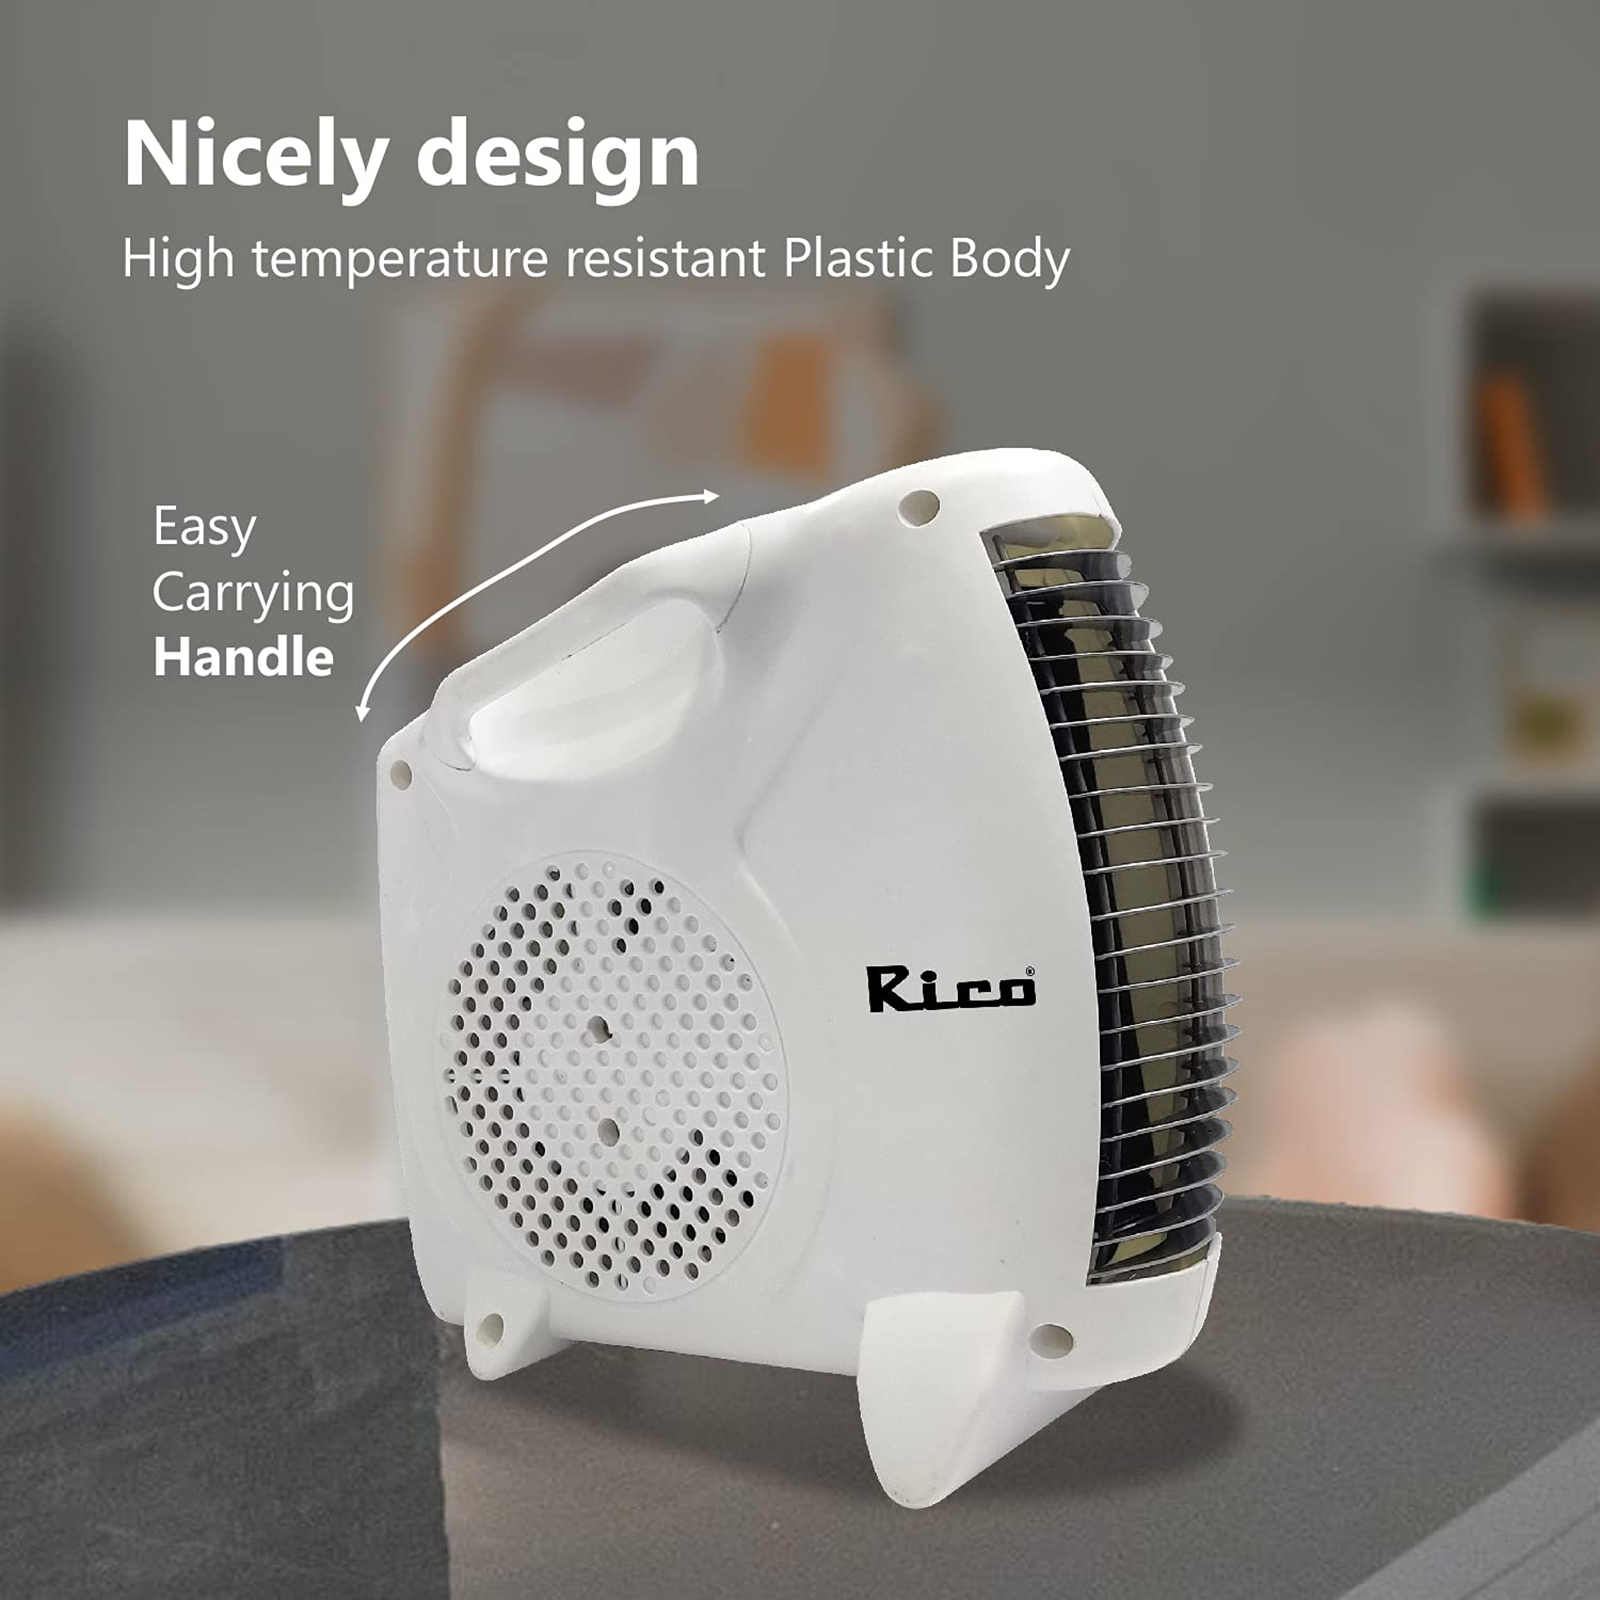 Rico ISI Certified 2000 Watts Room Heater With Japanese Fast Heating Technology and Free Replacement (Adjustable Thermostat Setting, RH1502, White)_3